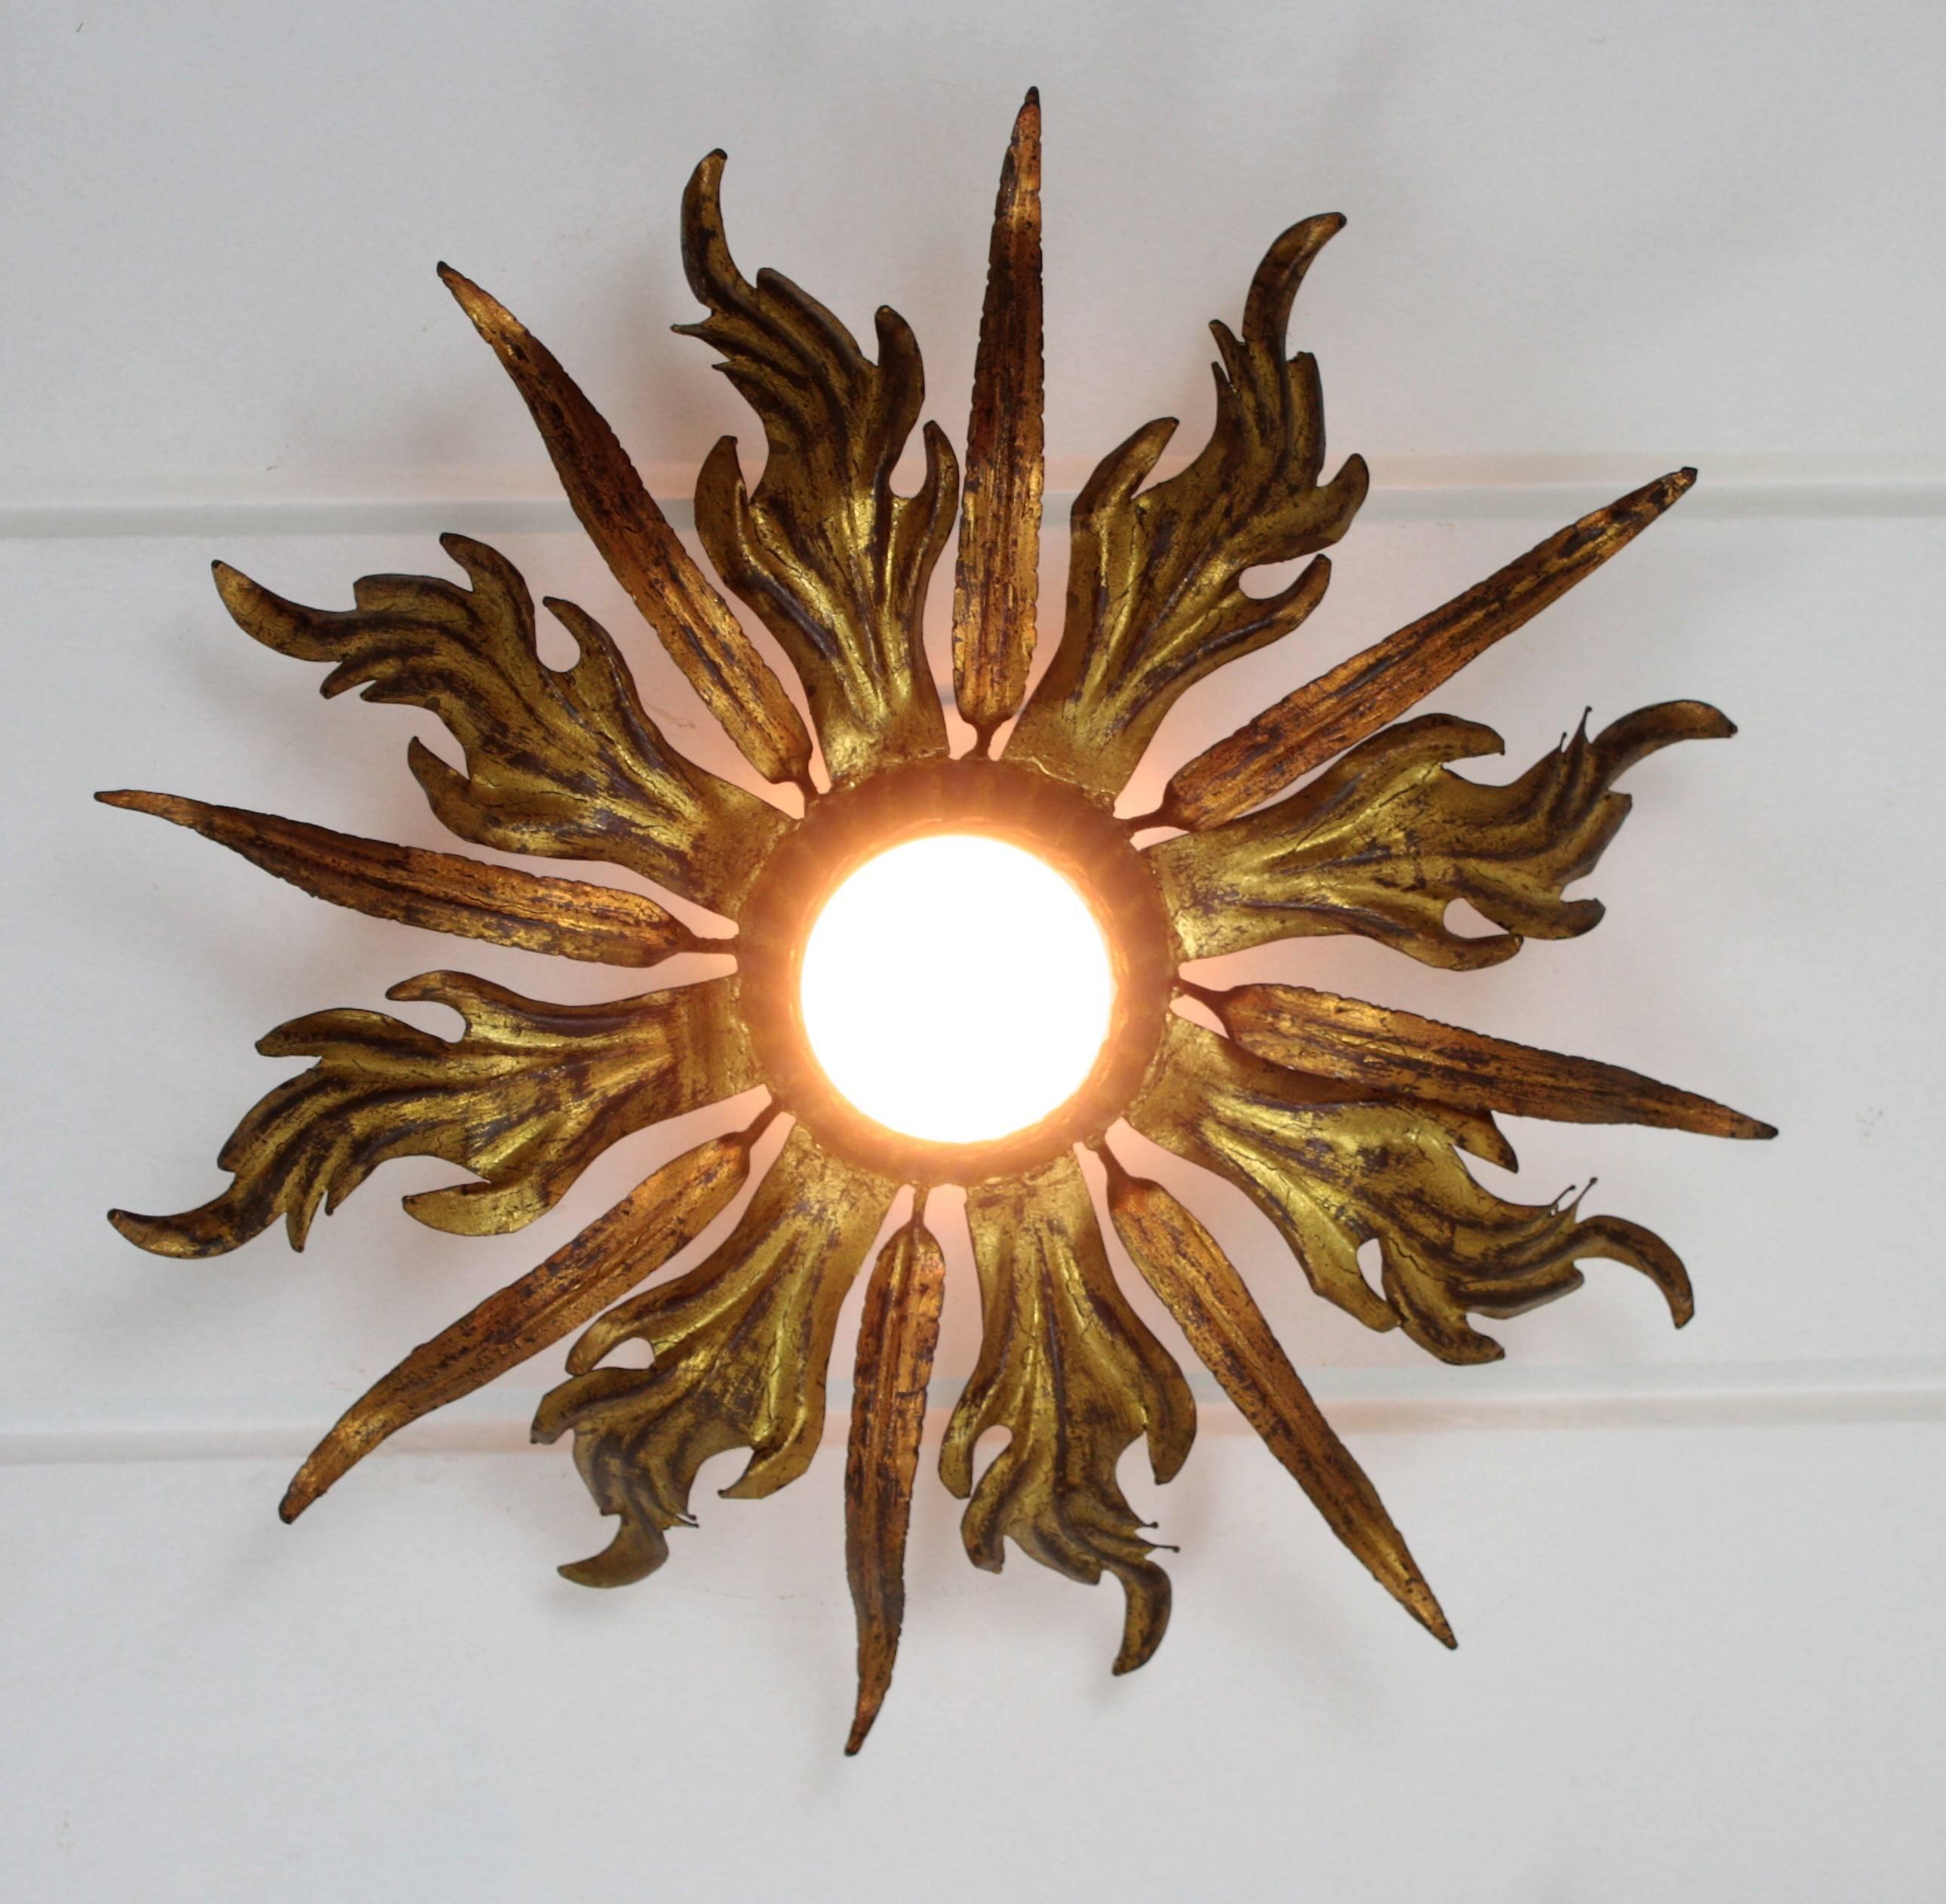 French 1930s Pair of Leafed Copper & Gilt Iron Sunburst Ceiling or Wall Sconces 2